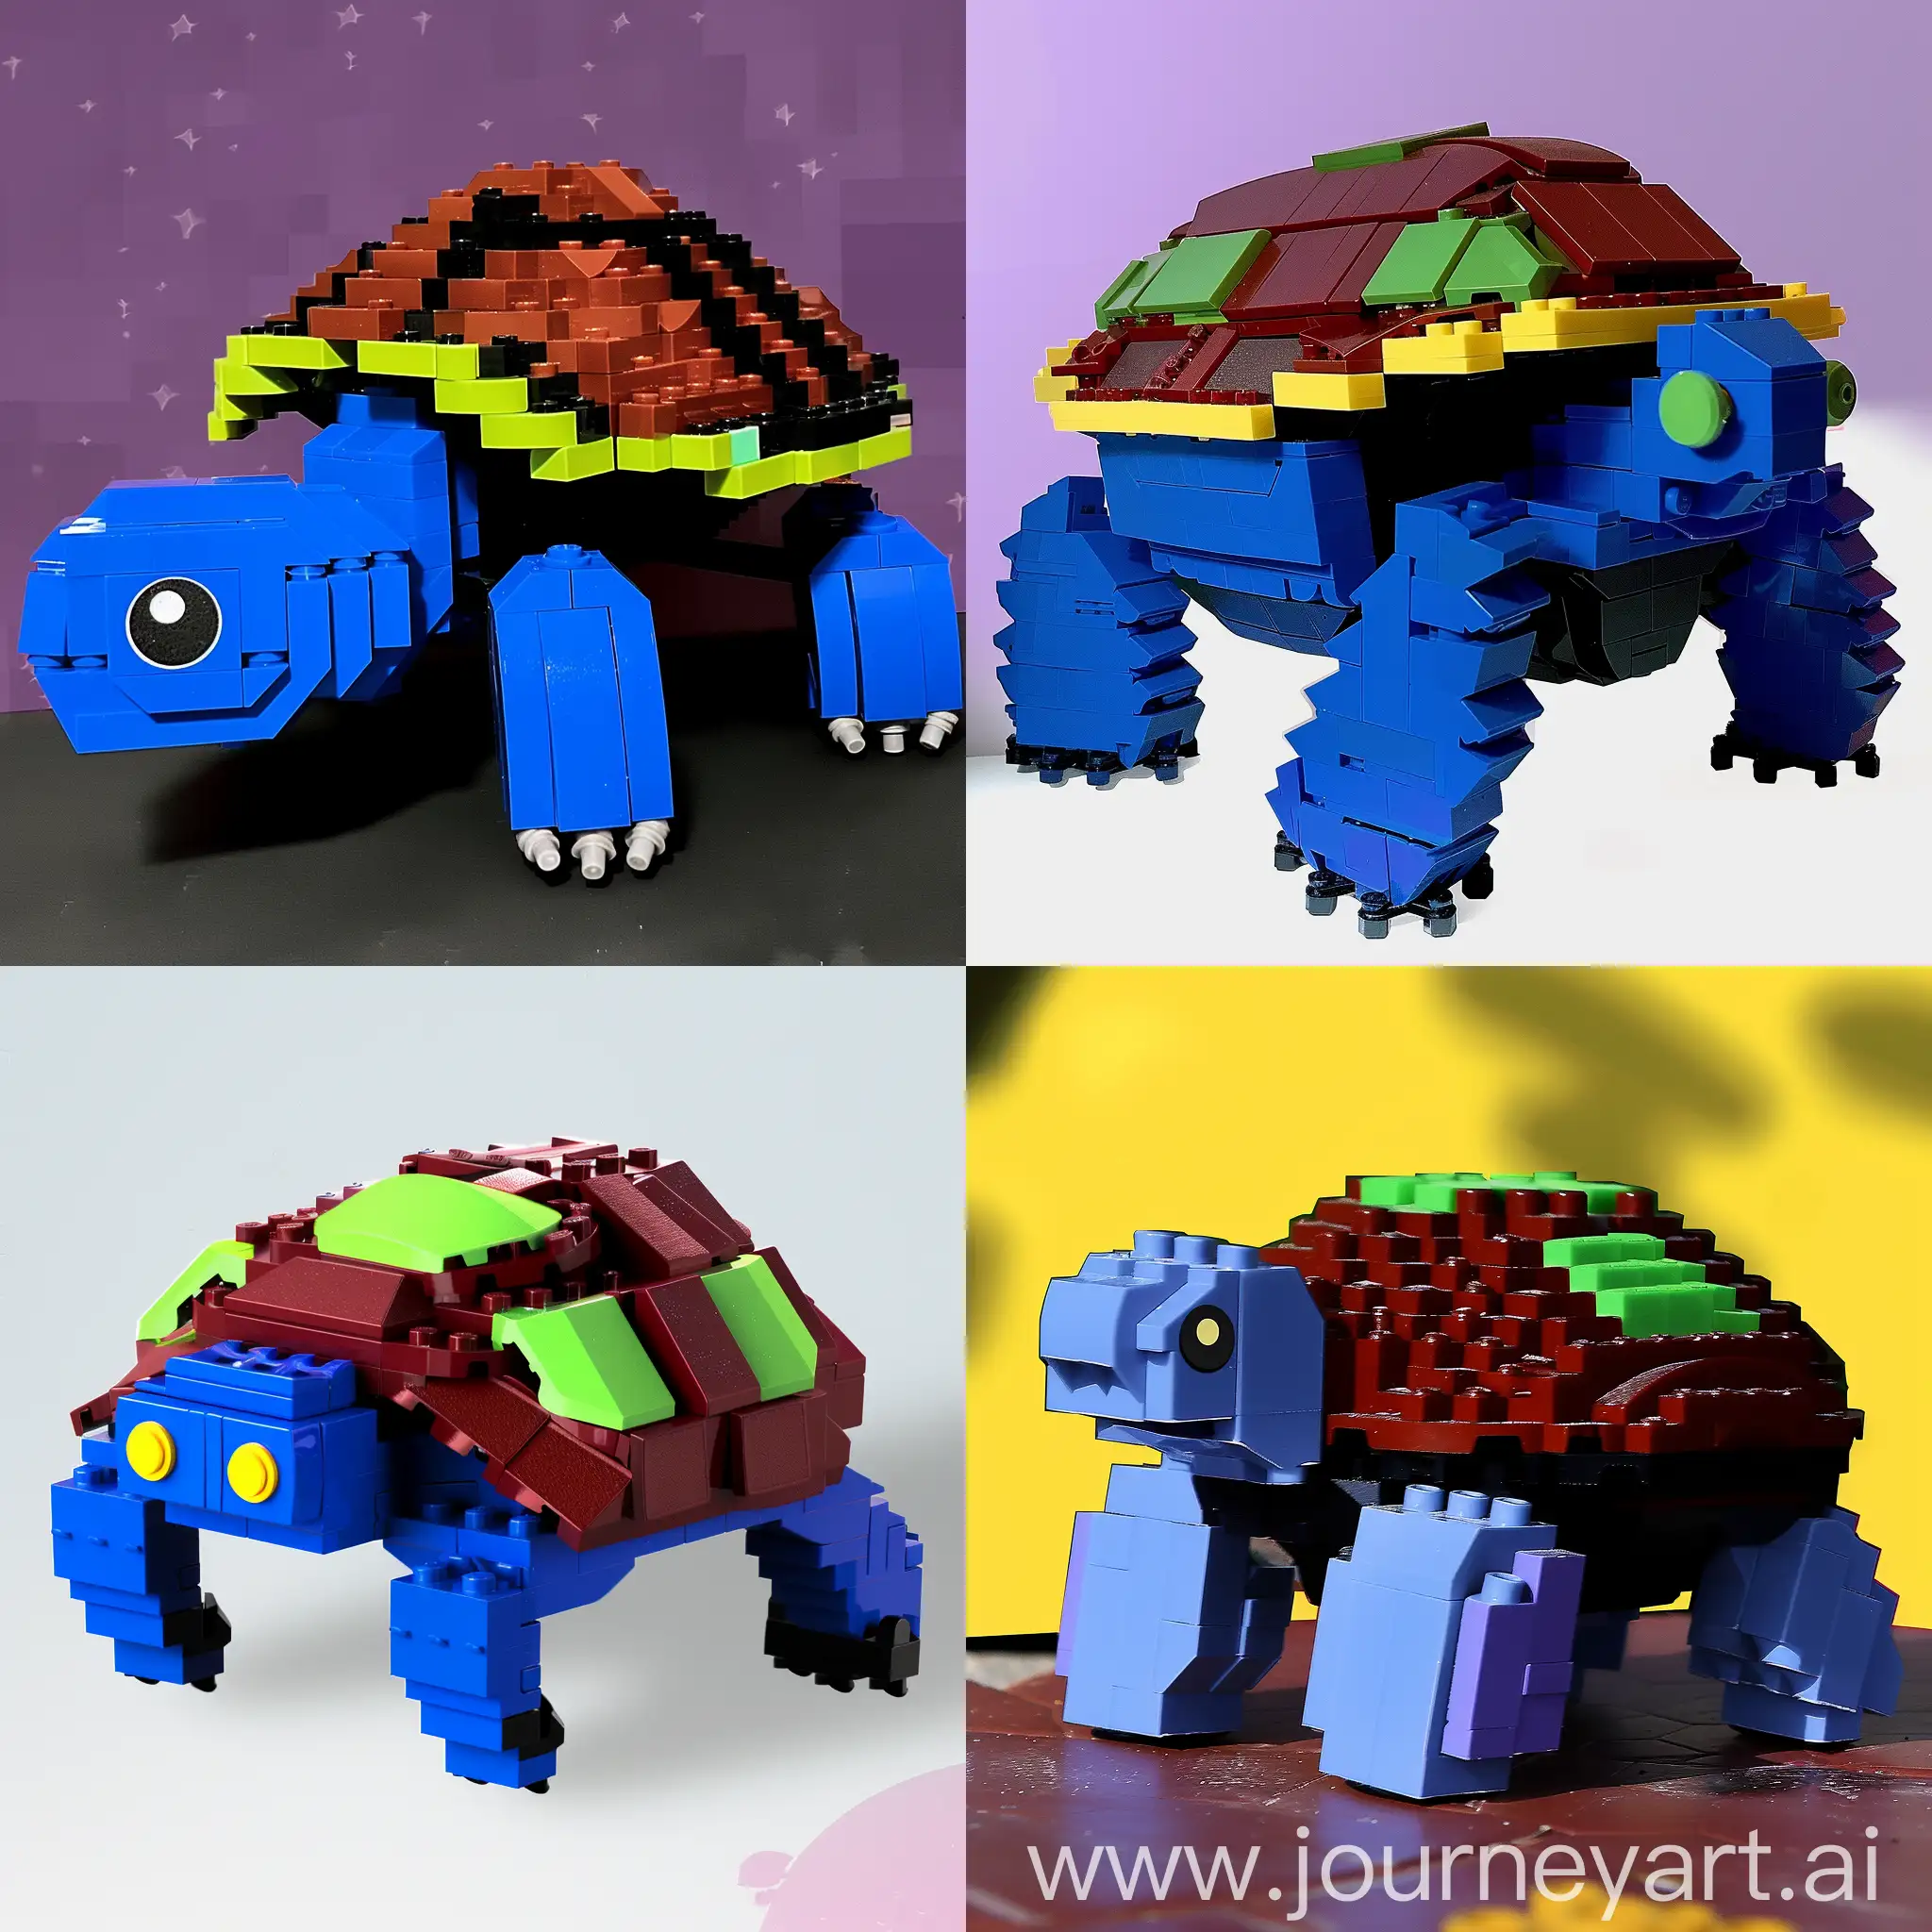 Colorful-Lego-Turtle-with-Blue-Body-and-Red-Shell